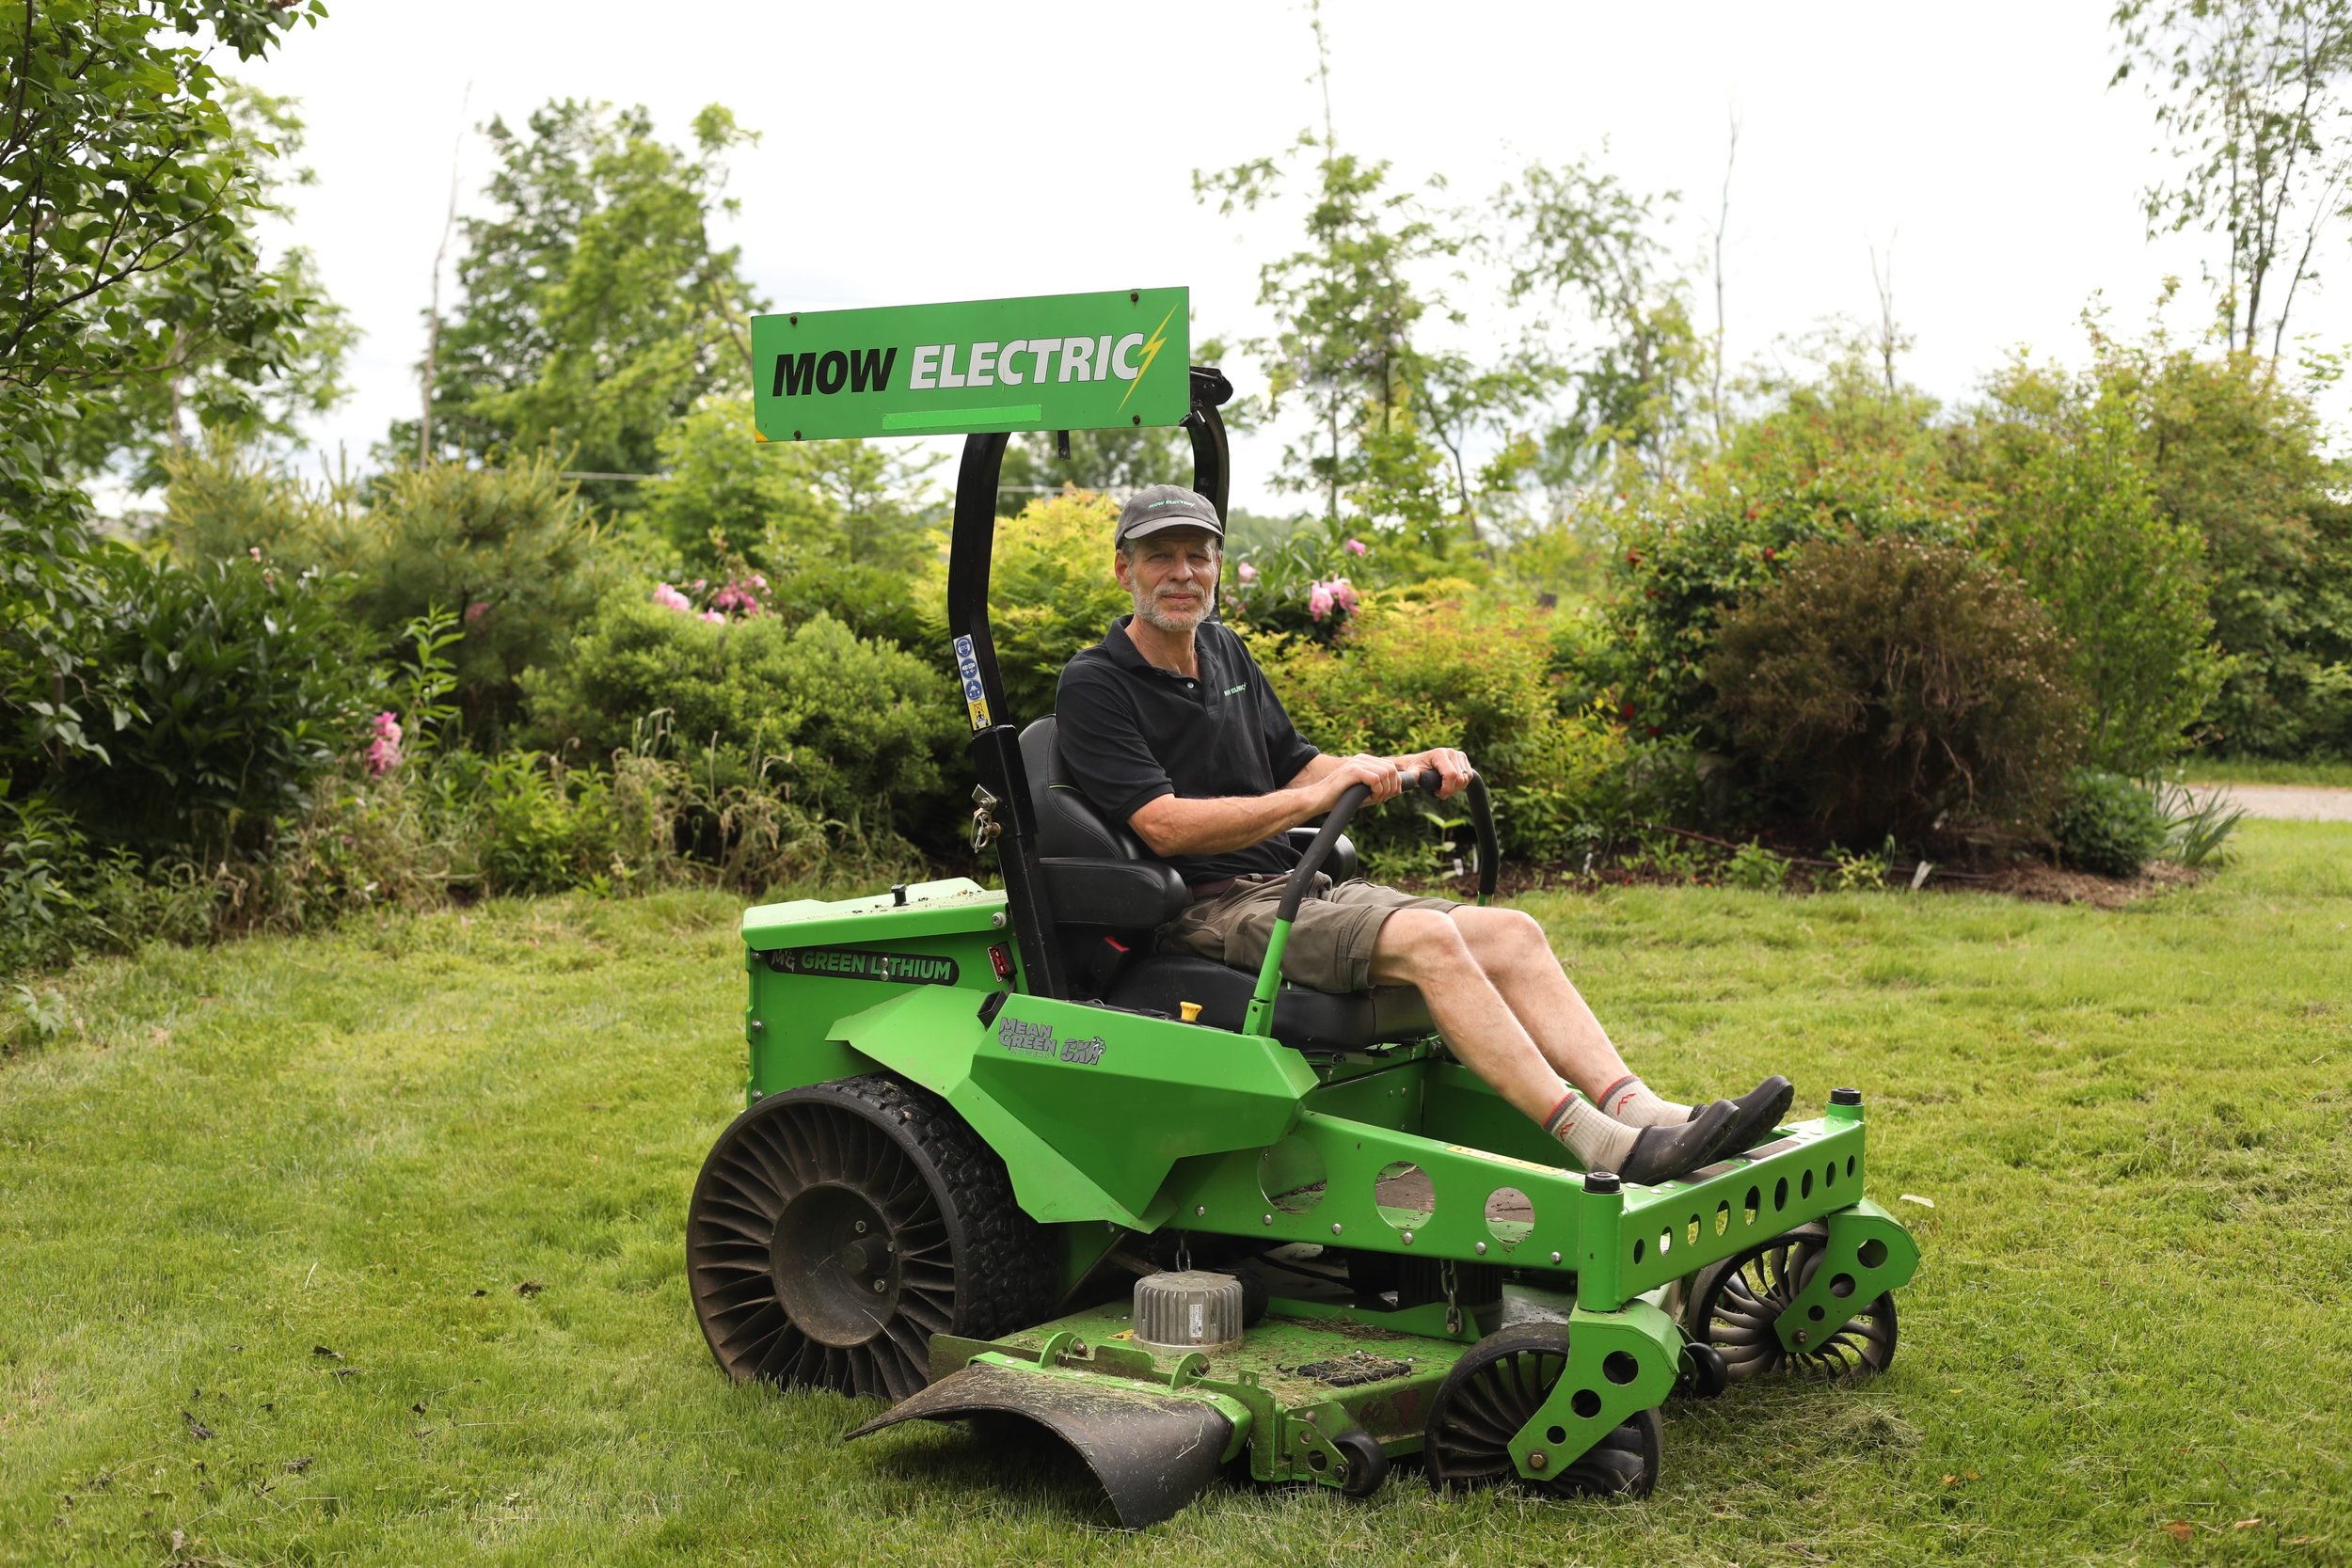 help-increase-rebates-for-electric-riding-lawnmowers-sustainable